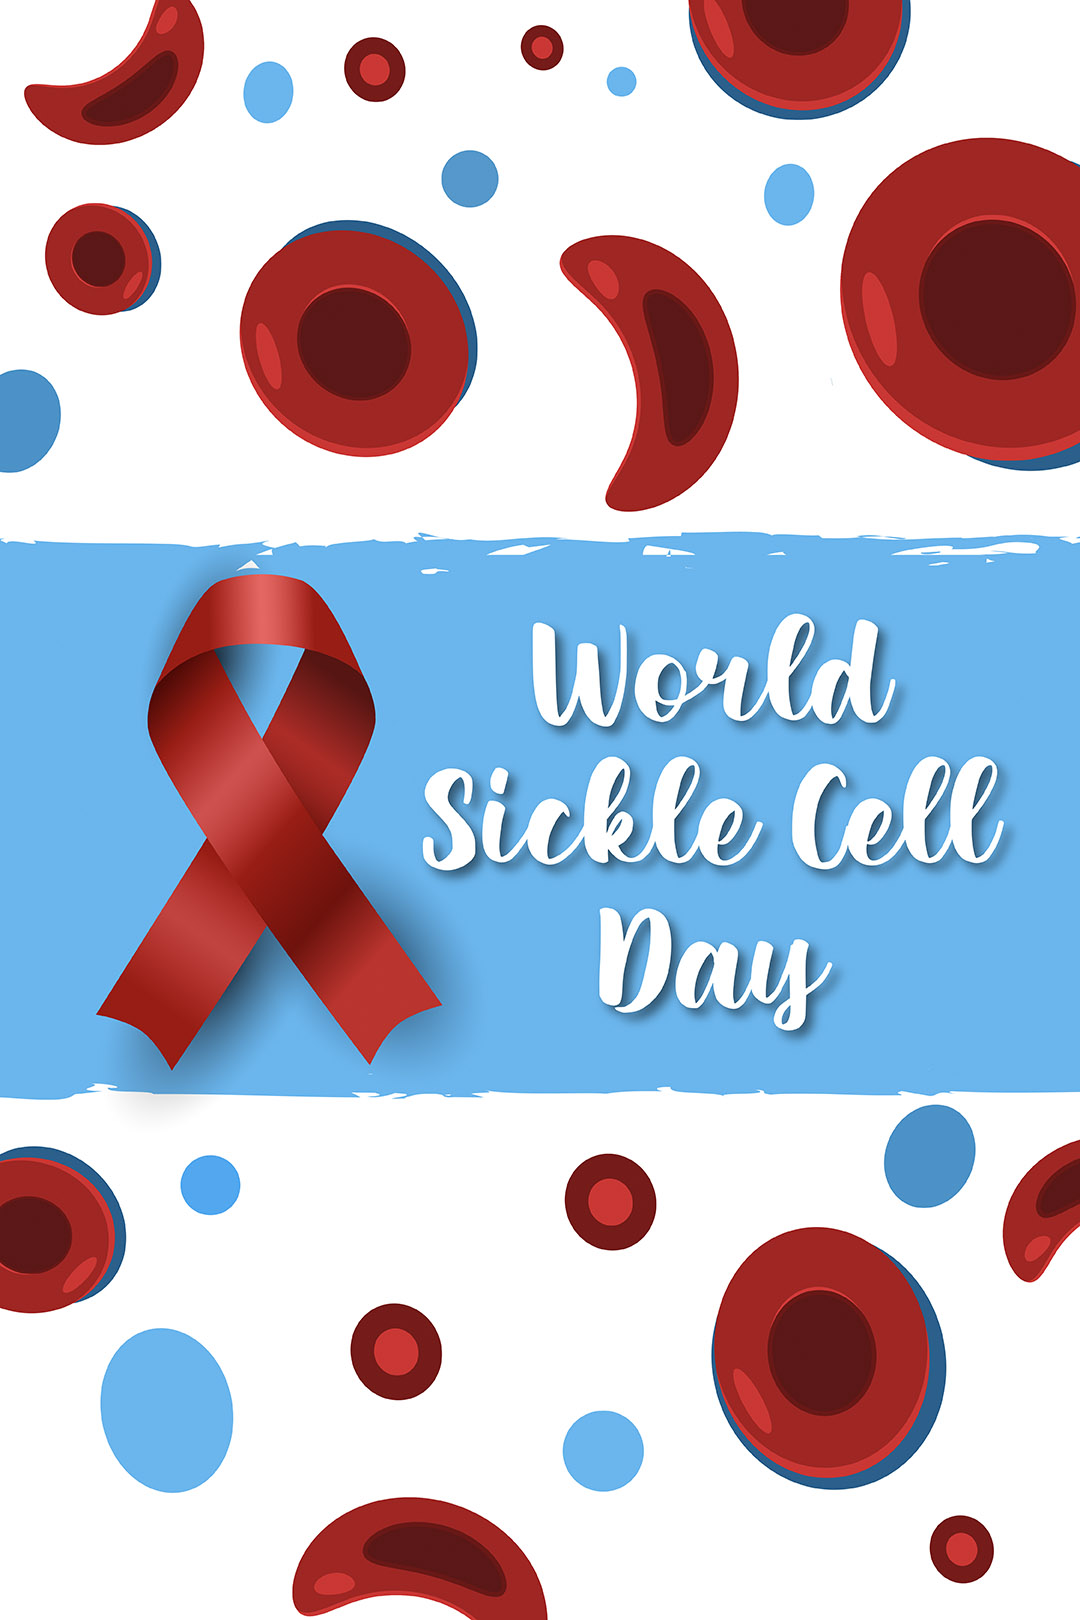 June 19th is Sickle Cell Day.